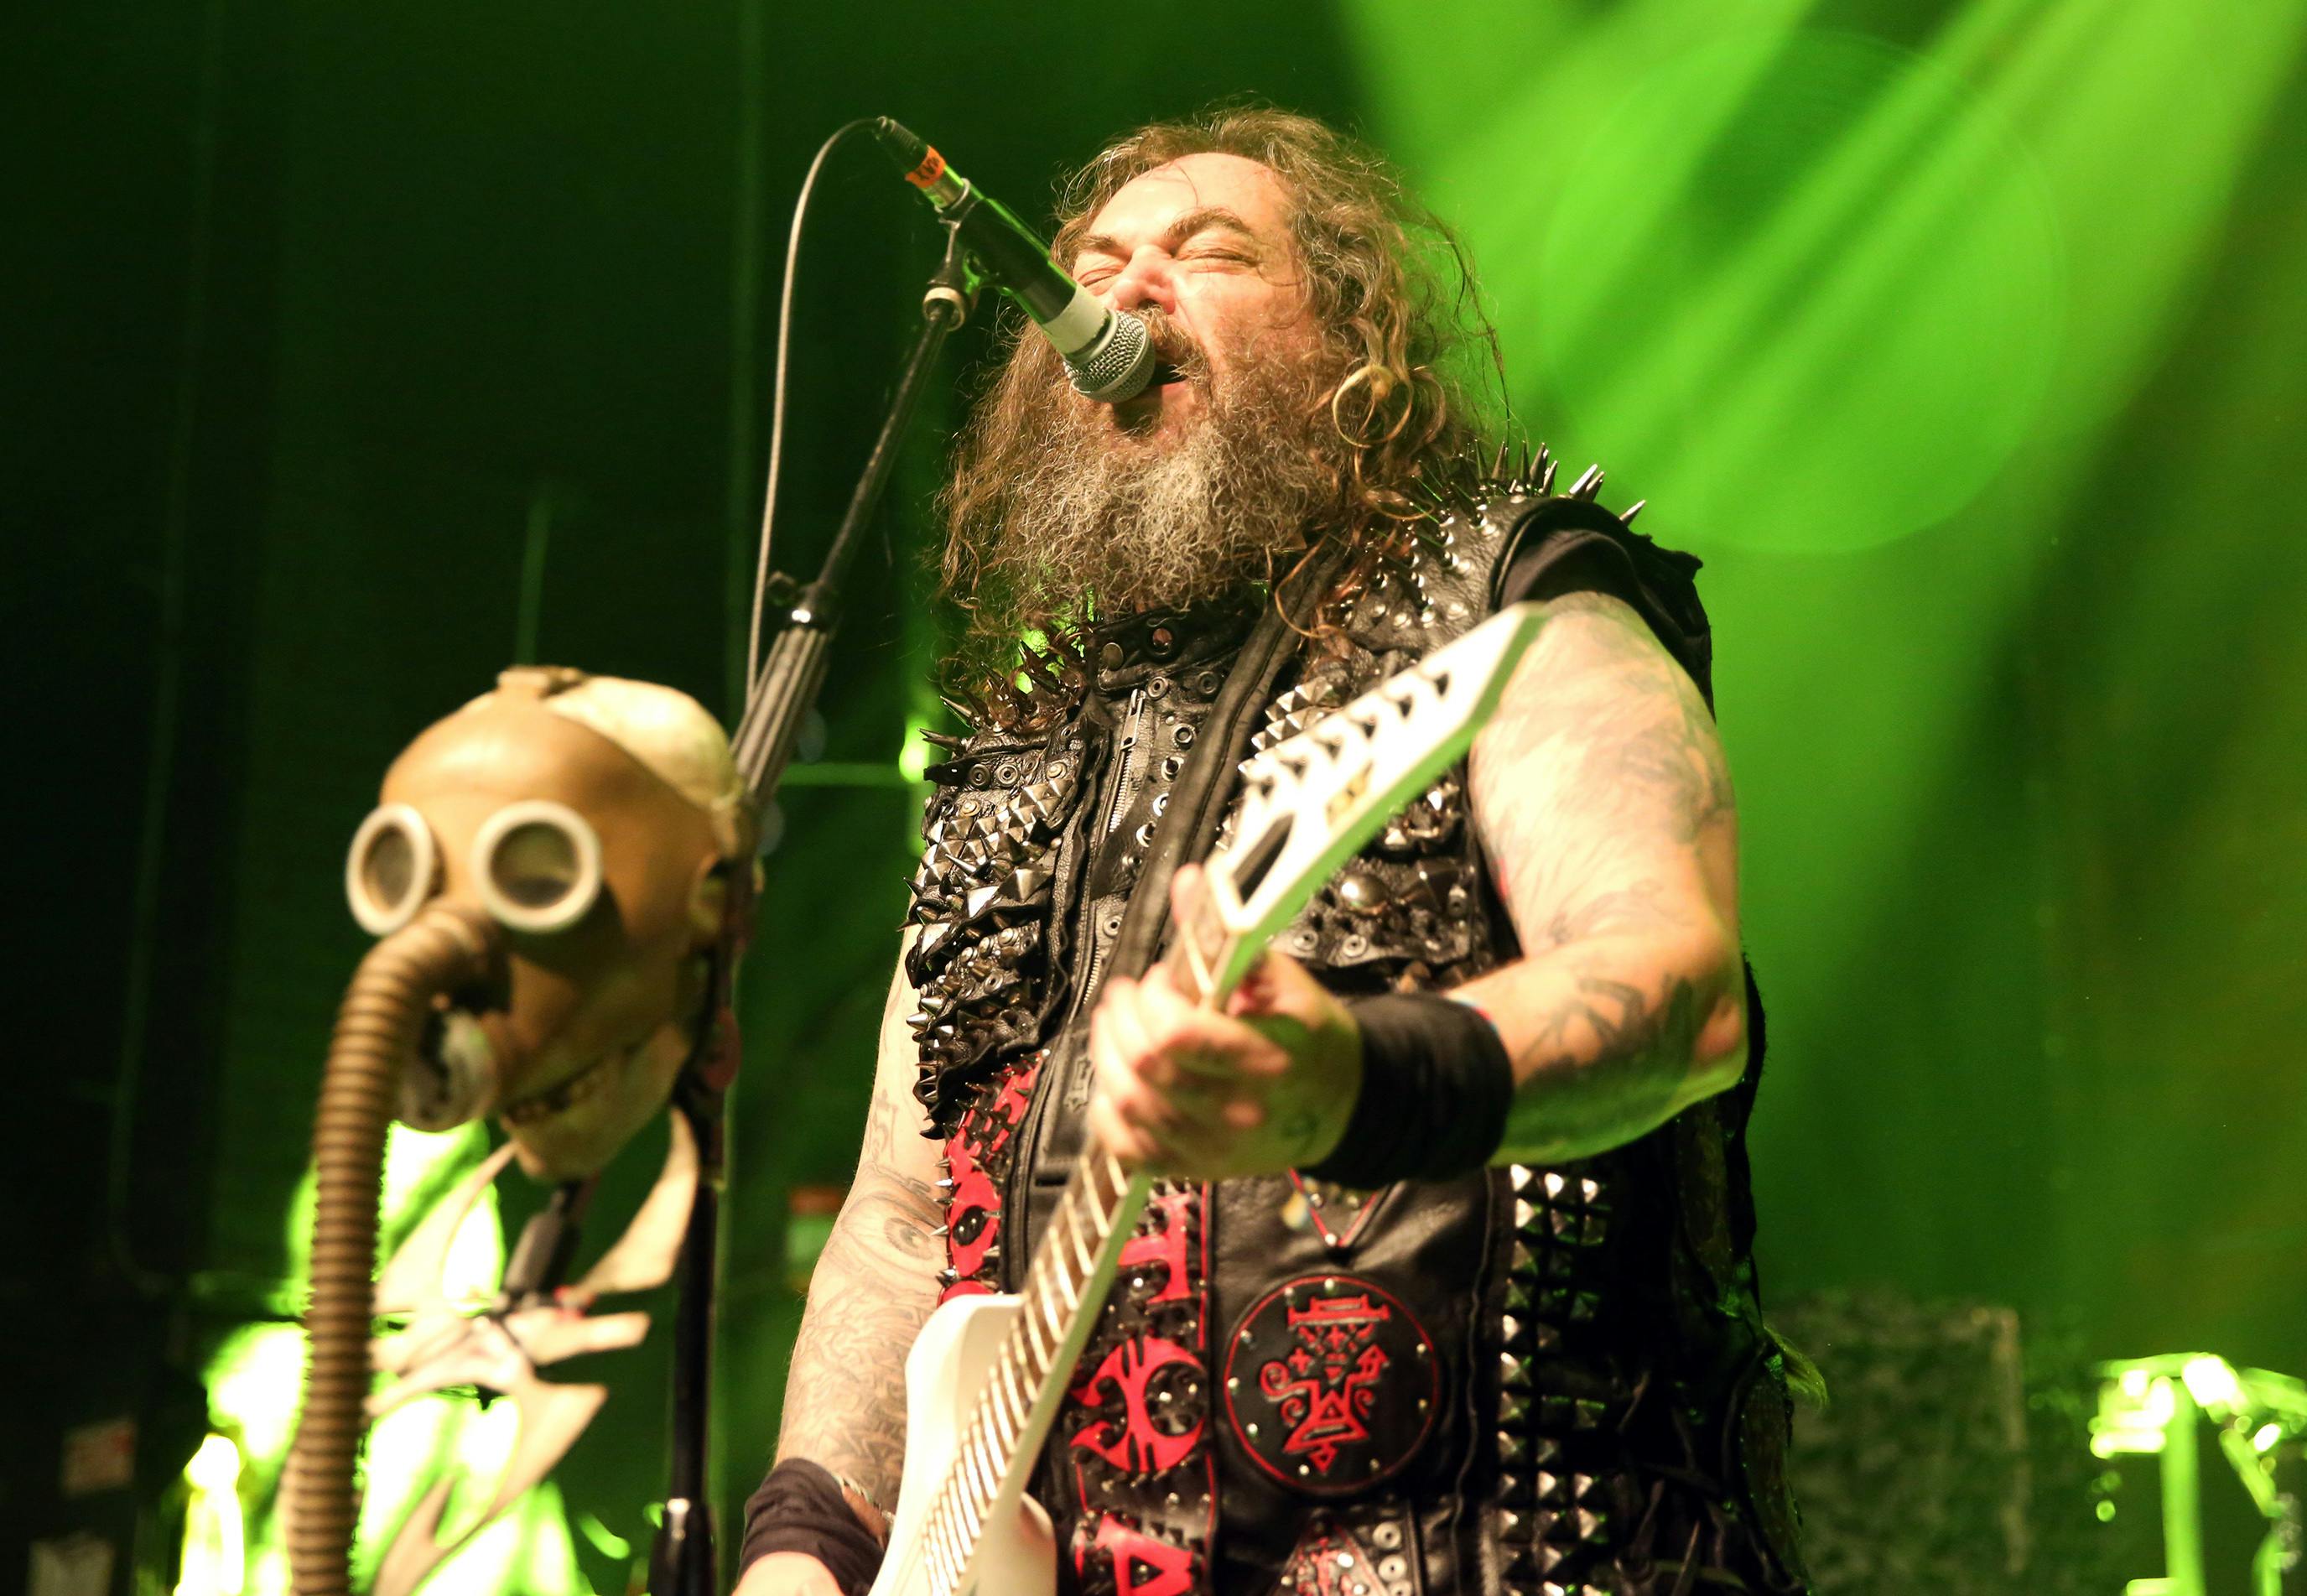 Soulfly's Max Cavalera: "We'll Play Anywhere… Metal Is Bigger Than Fear"